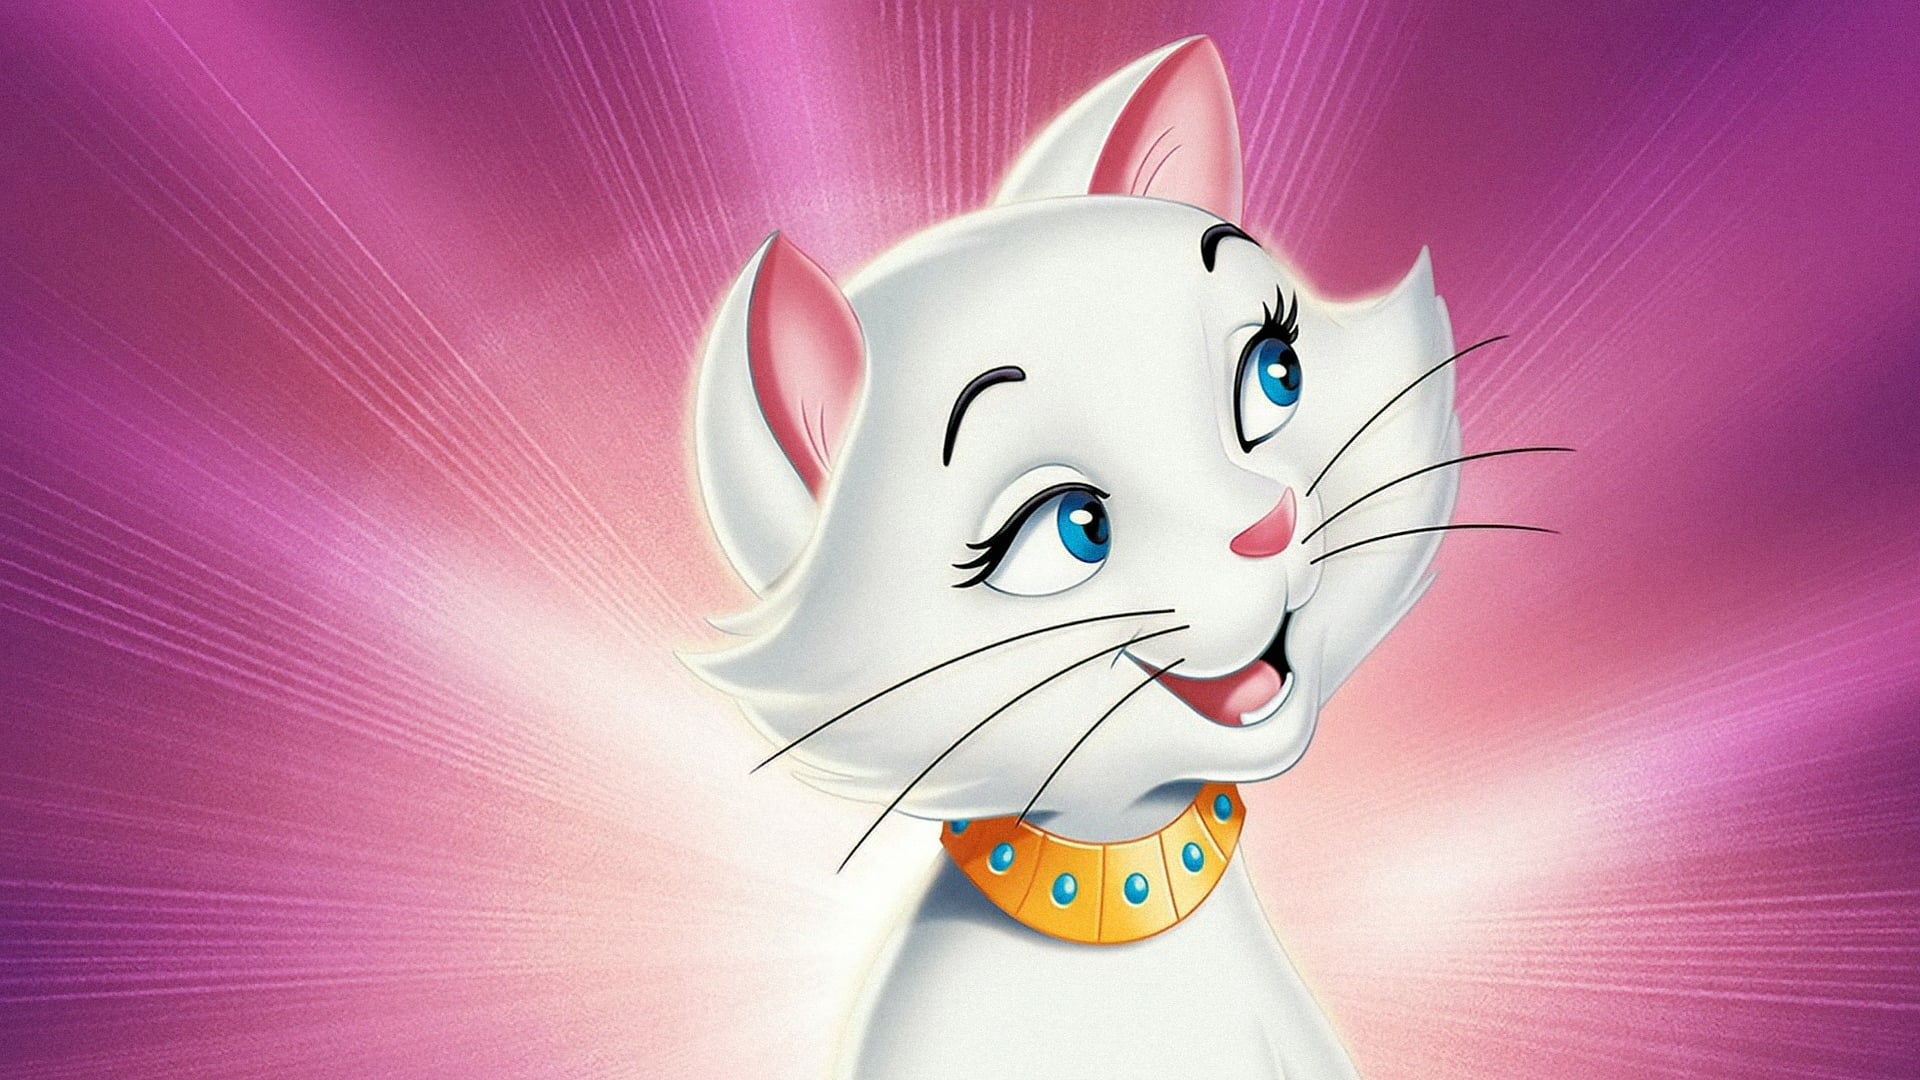 1920x1080 The Aristocats The Aristocats Wallpaper (43932157) Fanpop Page 9